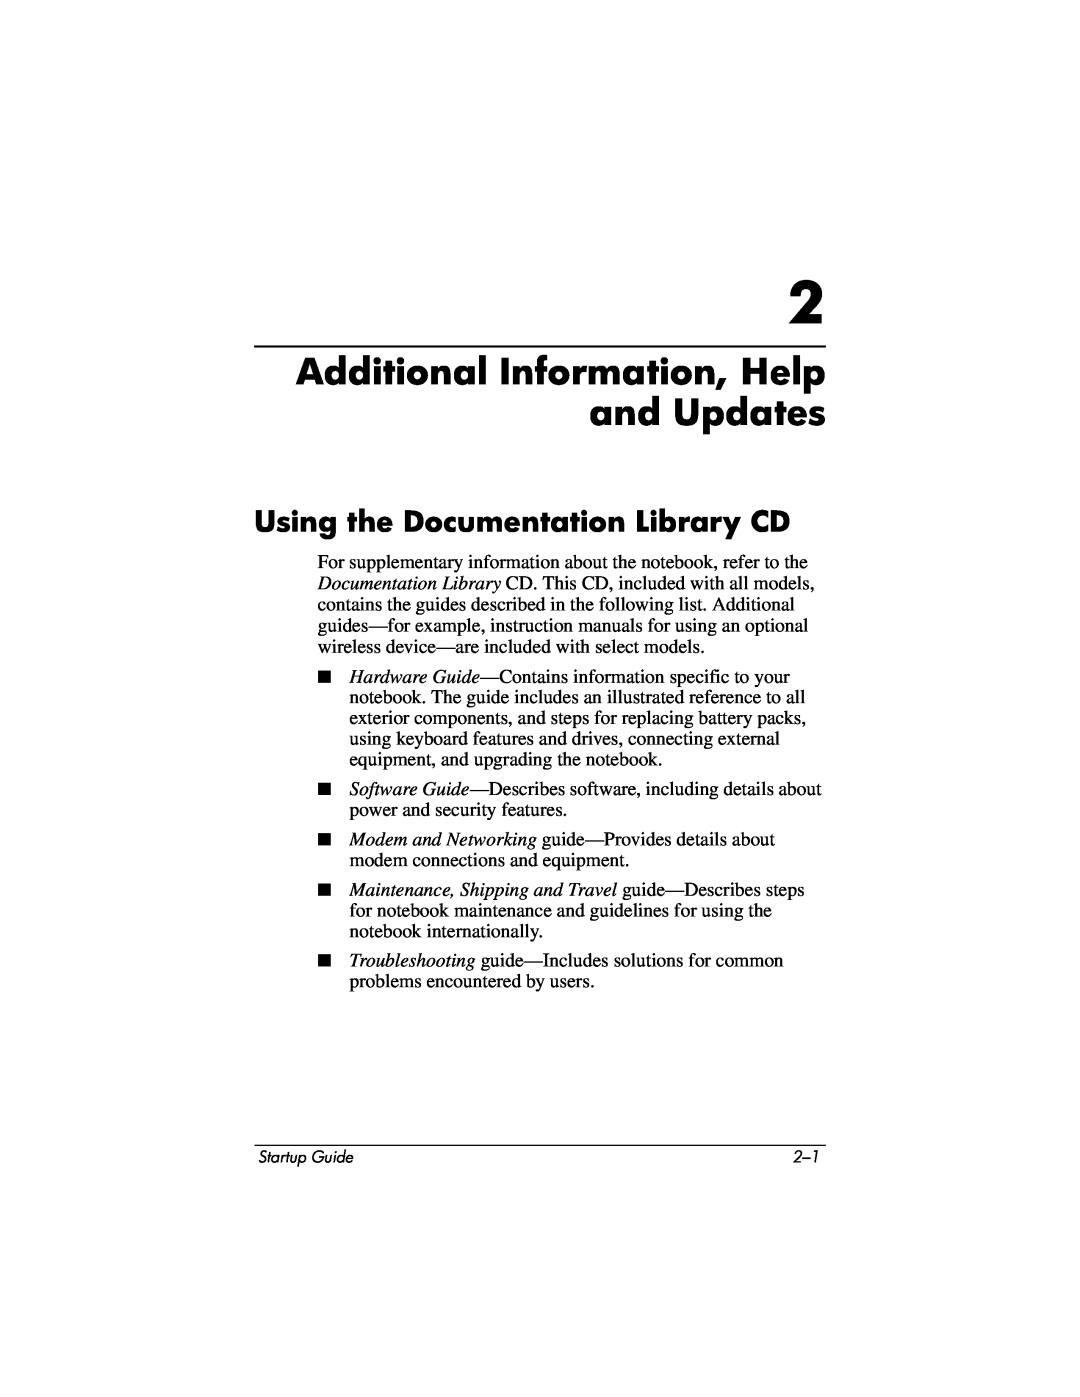 HP R3001AP, R3065US, R3070US, R3060US, R3050US Additional Information, Help and Updates, Using the Documentation Library CD 